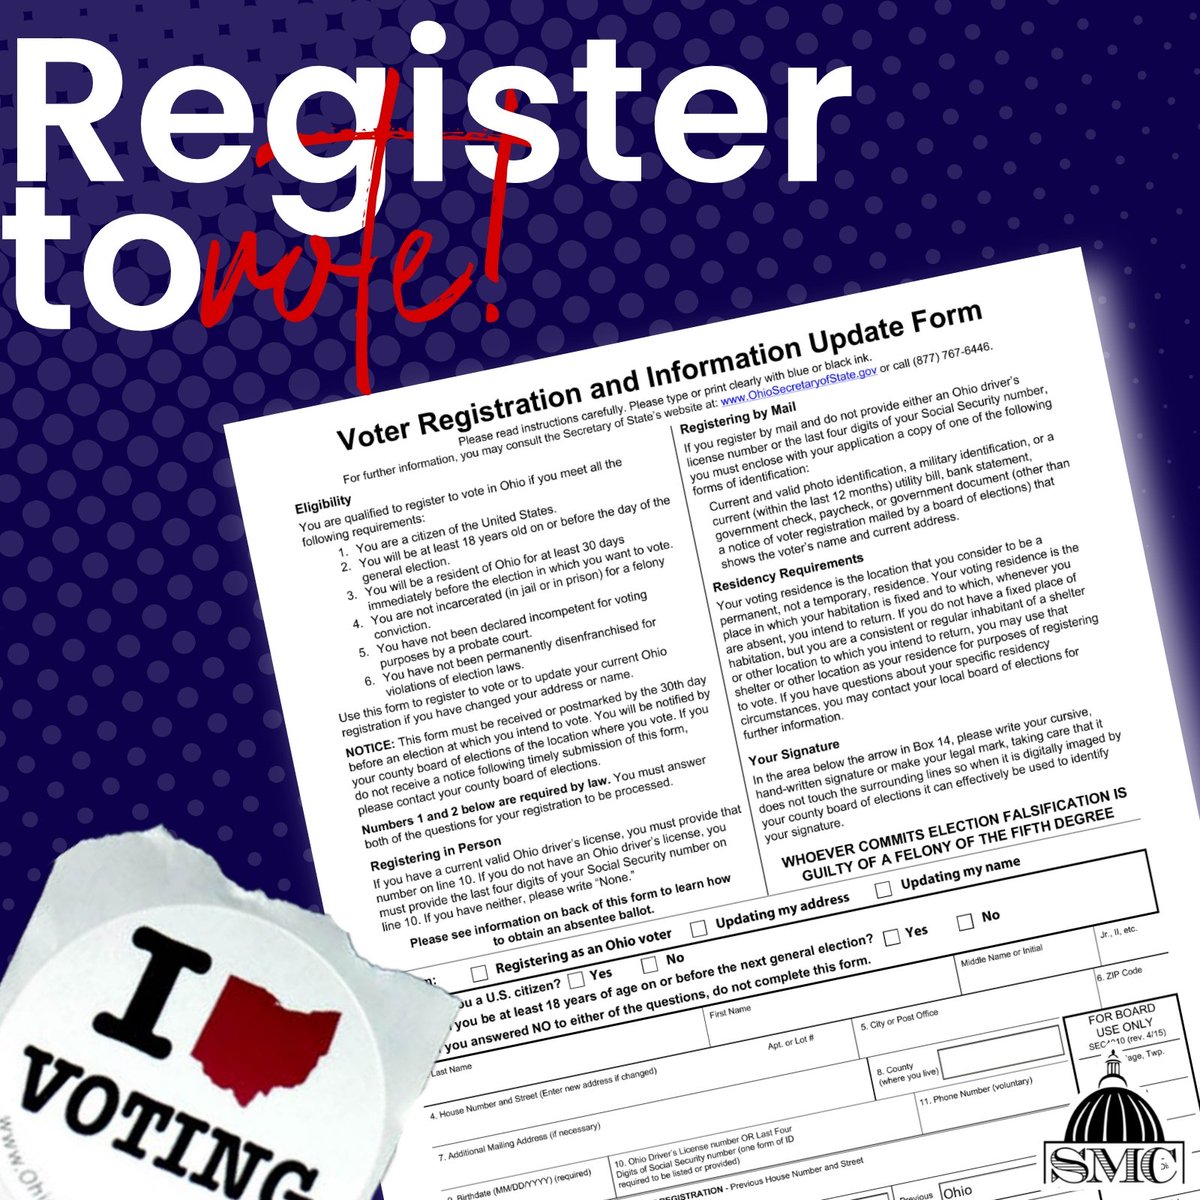 VOTER'S ALERT!

Don't forget that tomorrow is the deadline for Ohioans to register so you can vote this November in Ohio!

Head over to vote.org to complete your registration and access additional voting resources.

#VoteYesOnIssue1 #Vote #VoteYesOnIssue2